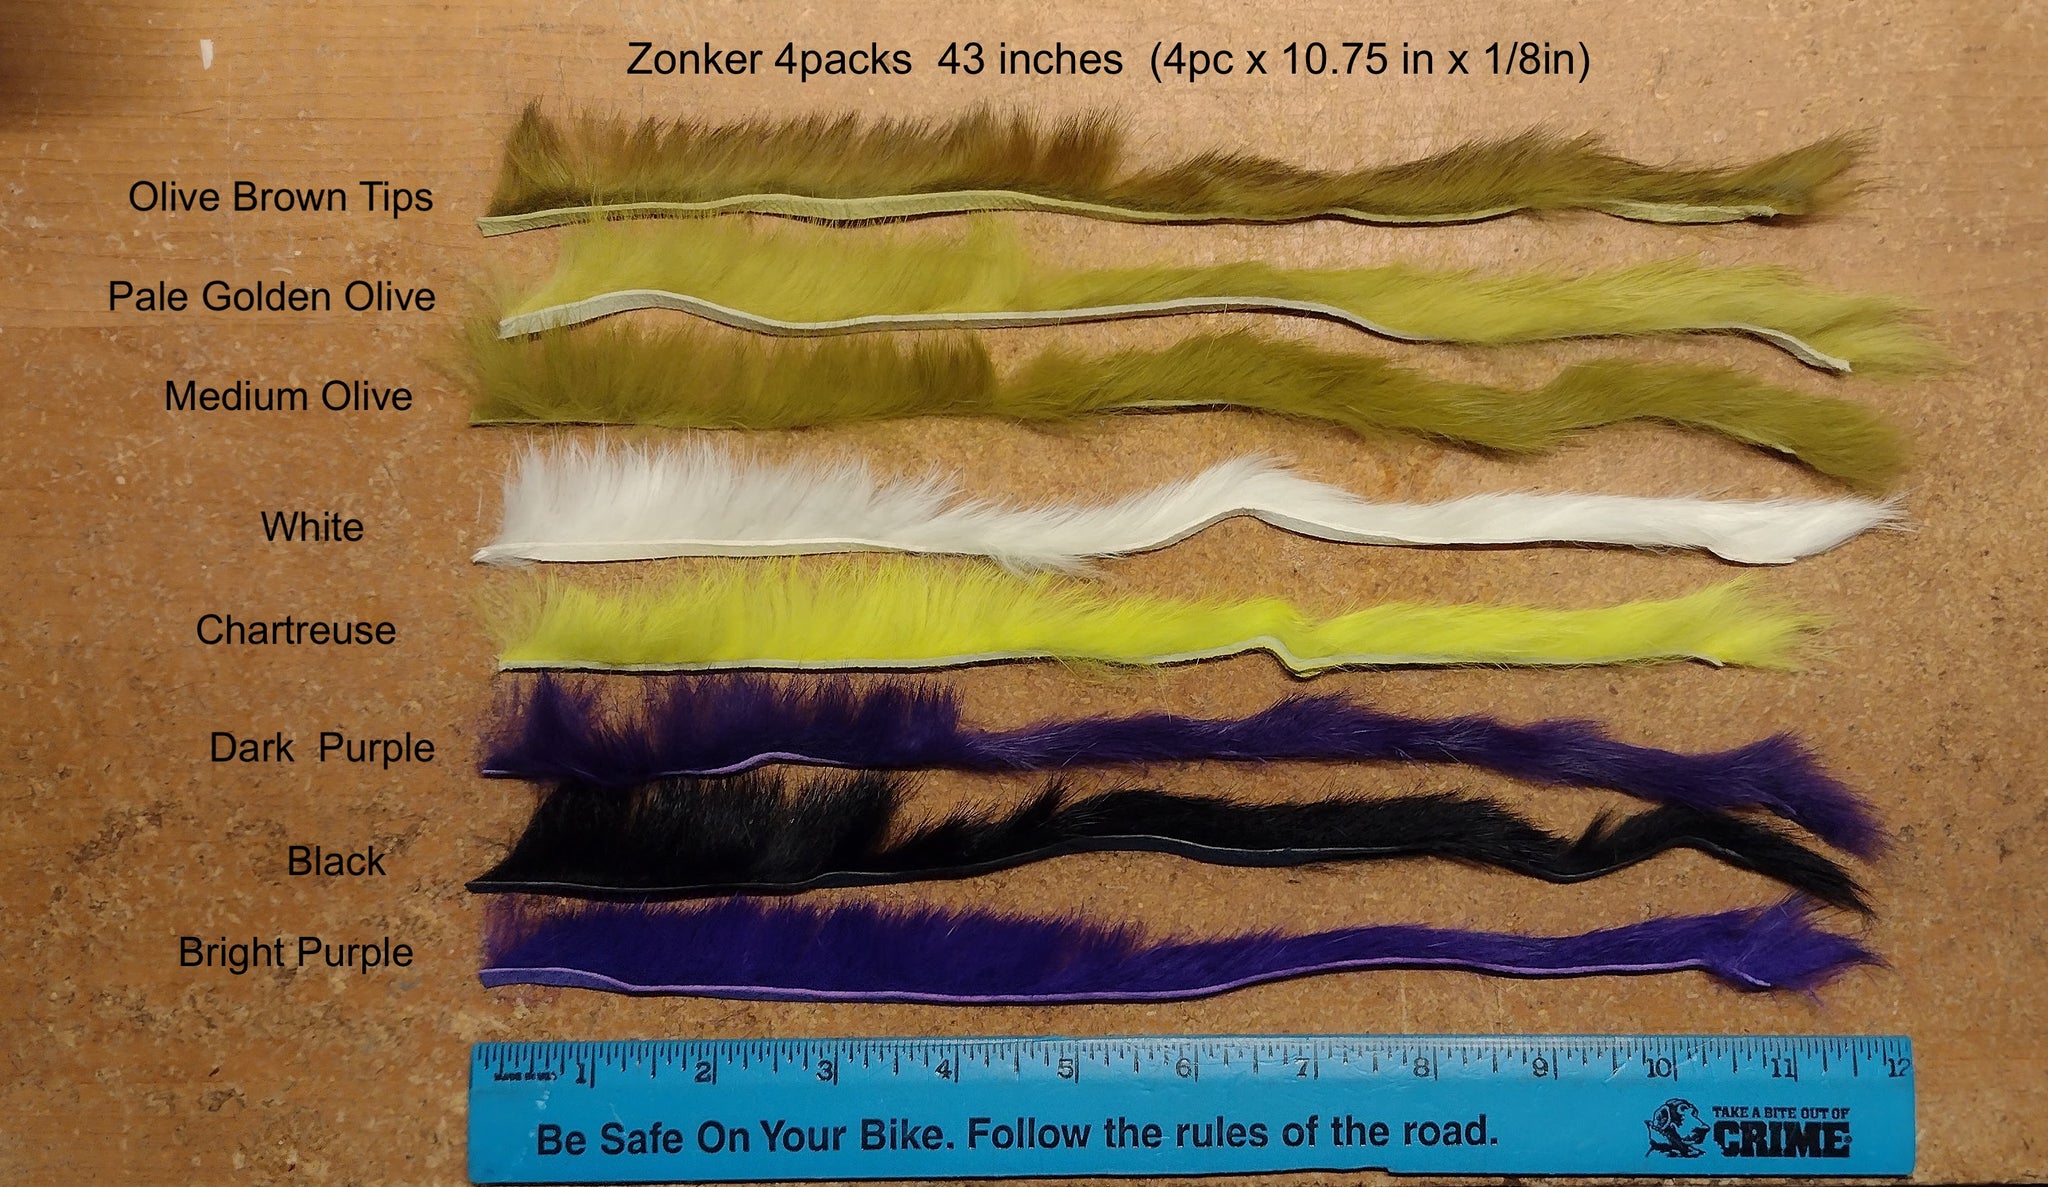 Zonker 4pack 43inches $3.50